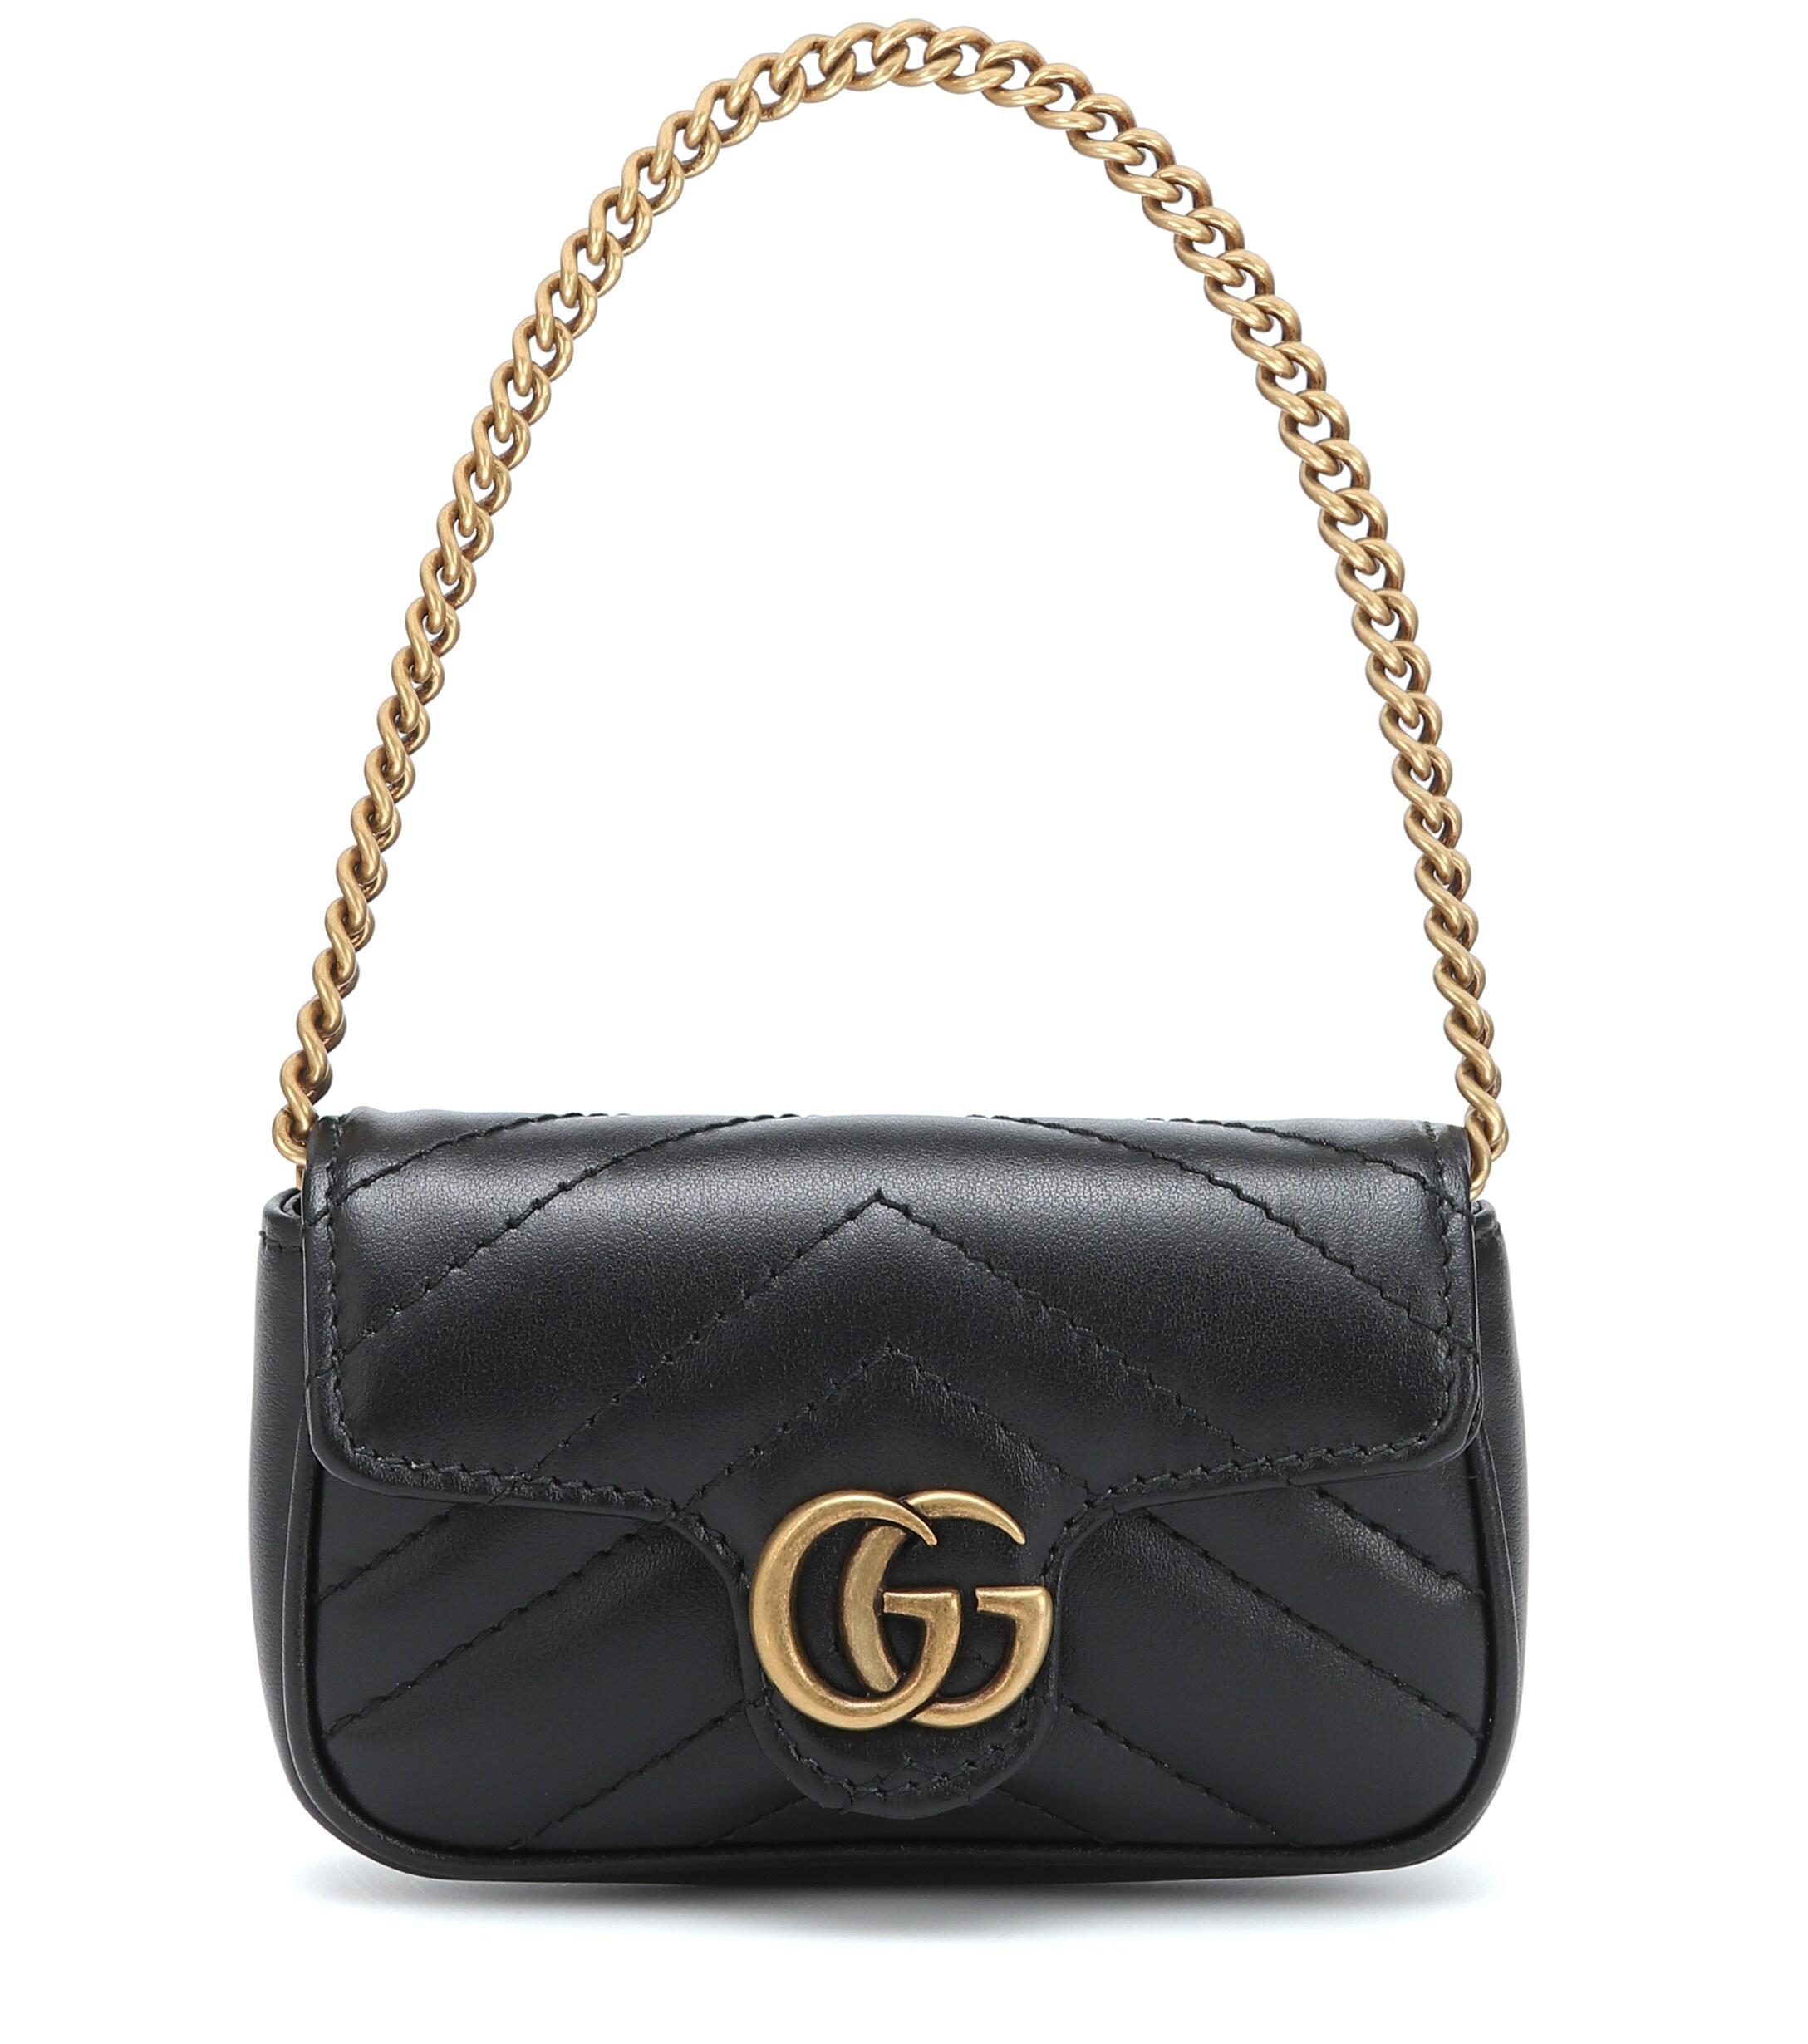 Gucci Gg Marmont 2.0 Leather Coin Case in Black